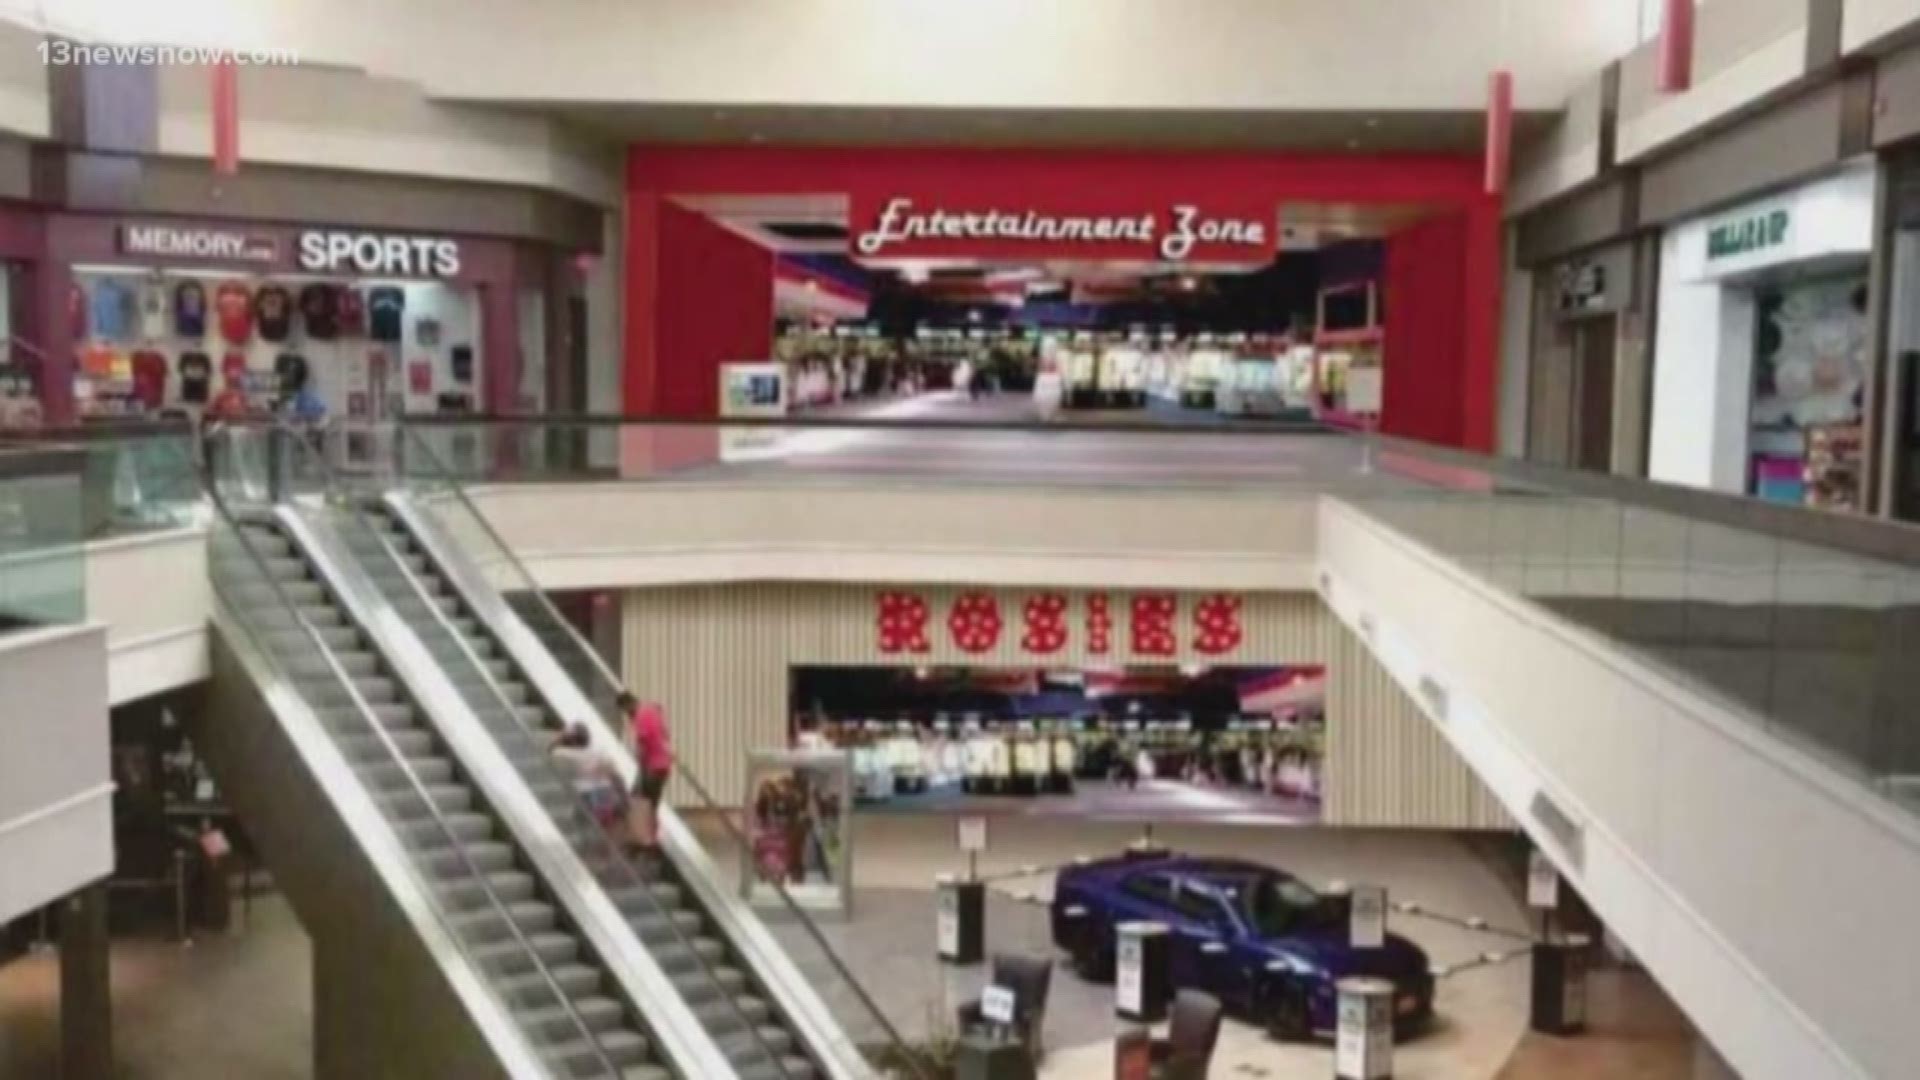 Plans are in the works to revitalize Greenbrier Mall, which is currently missing an anchor store.